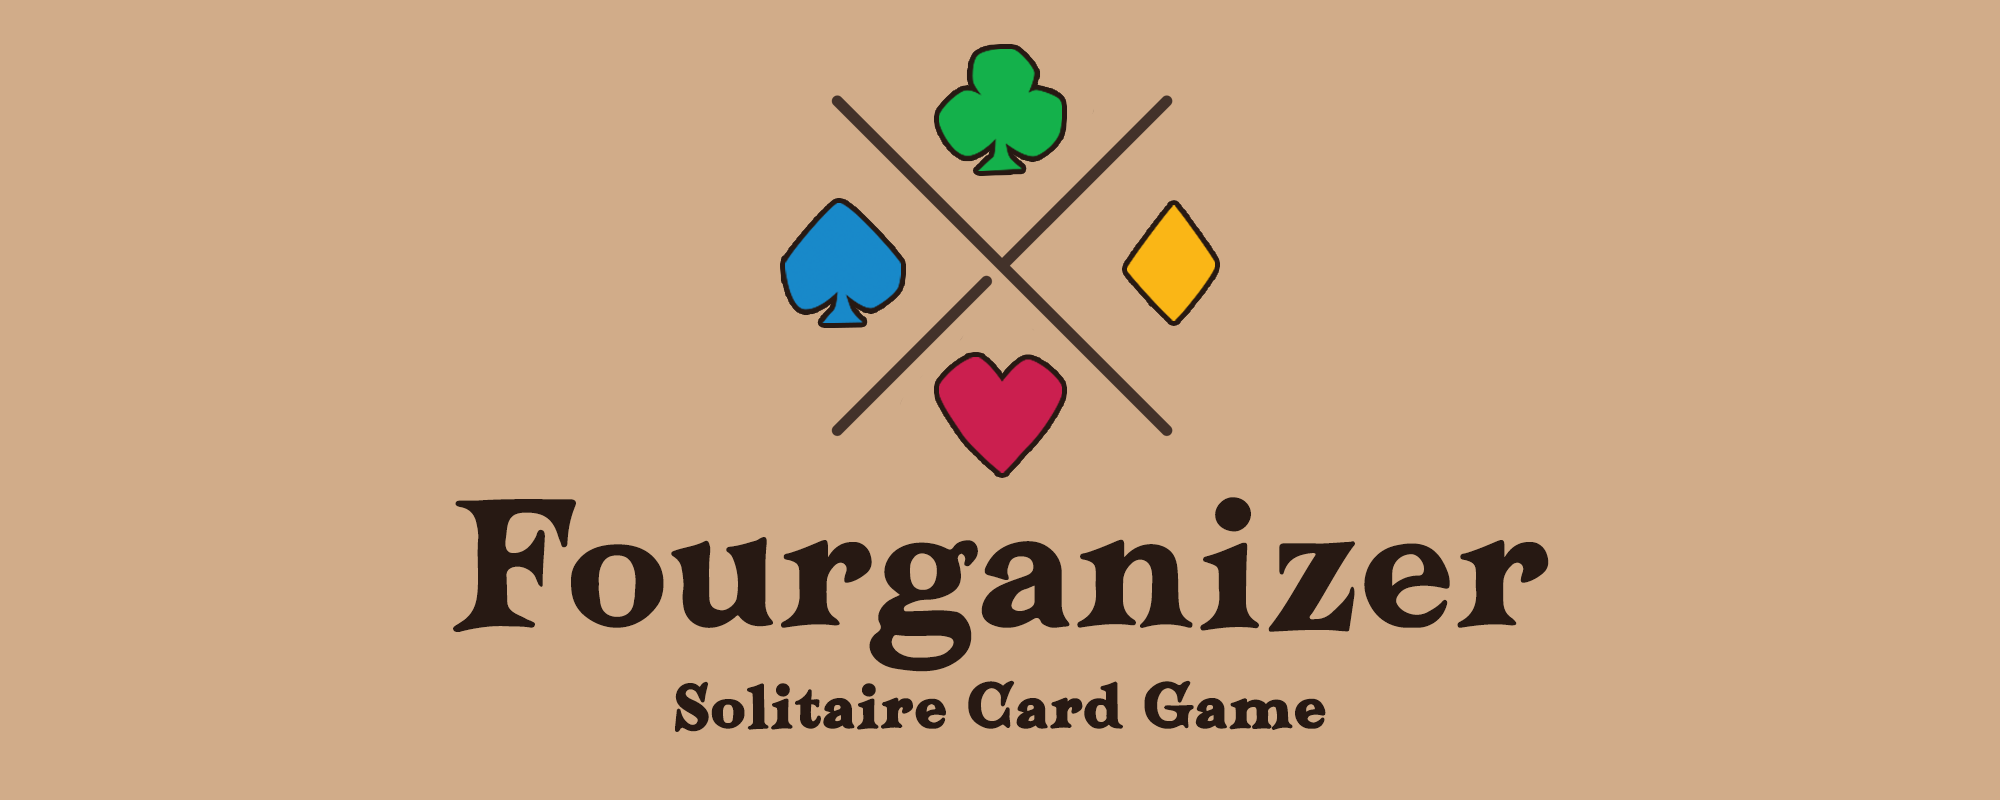 Fourganizer - Solitaire Card Game